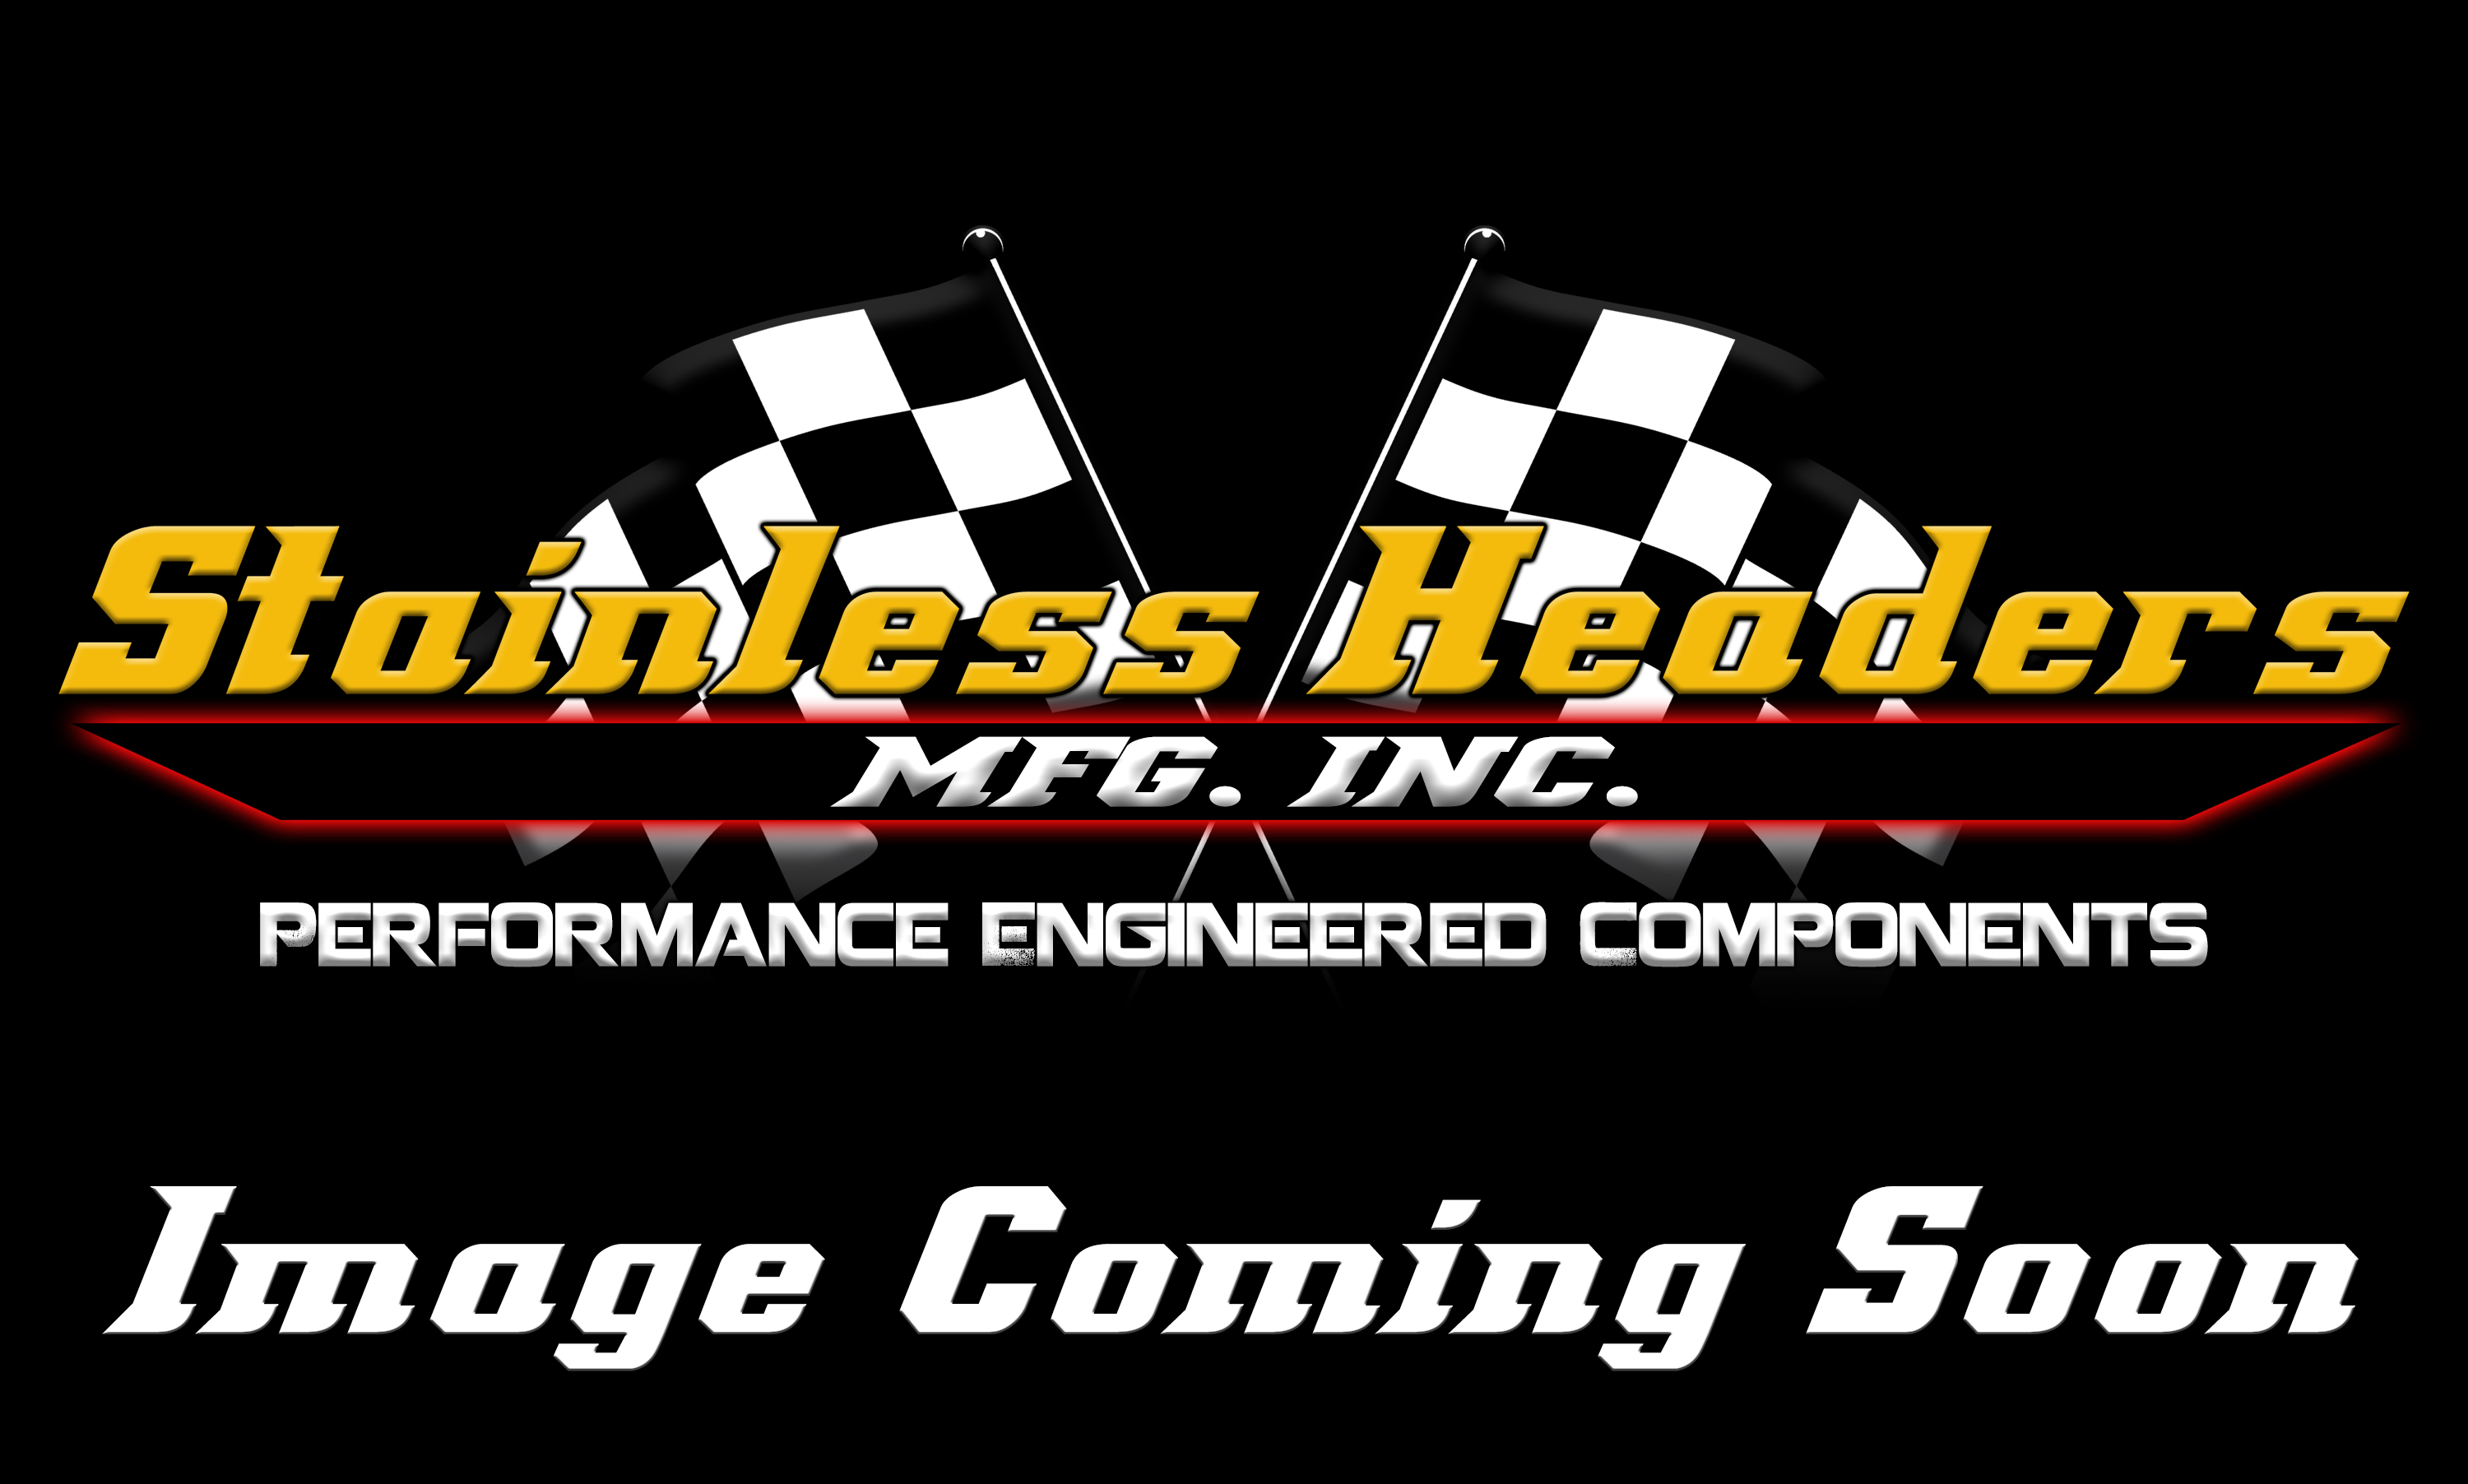 CompTurbo Technologies - CTR2868S-4847 Oil-Less 3.0 Turbocharger (575 HP) - Image 1